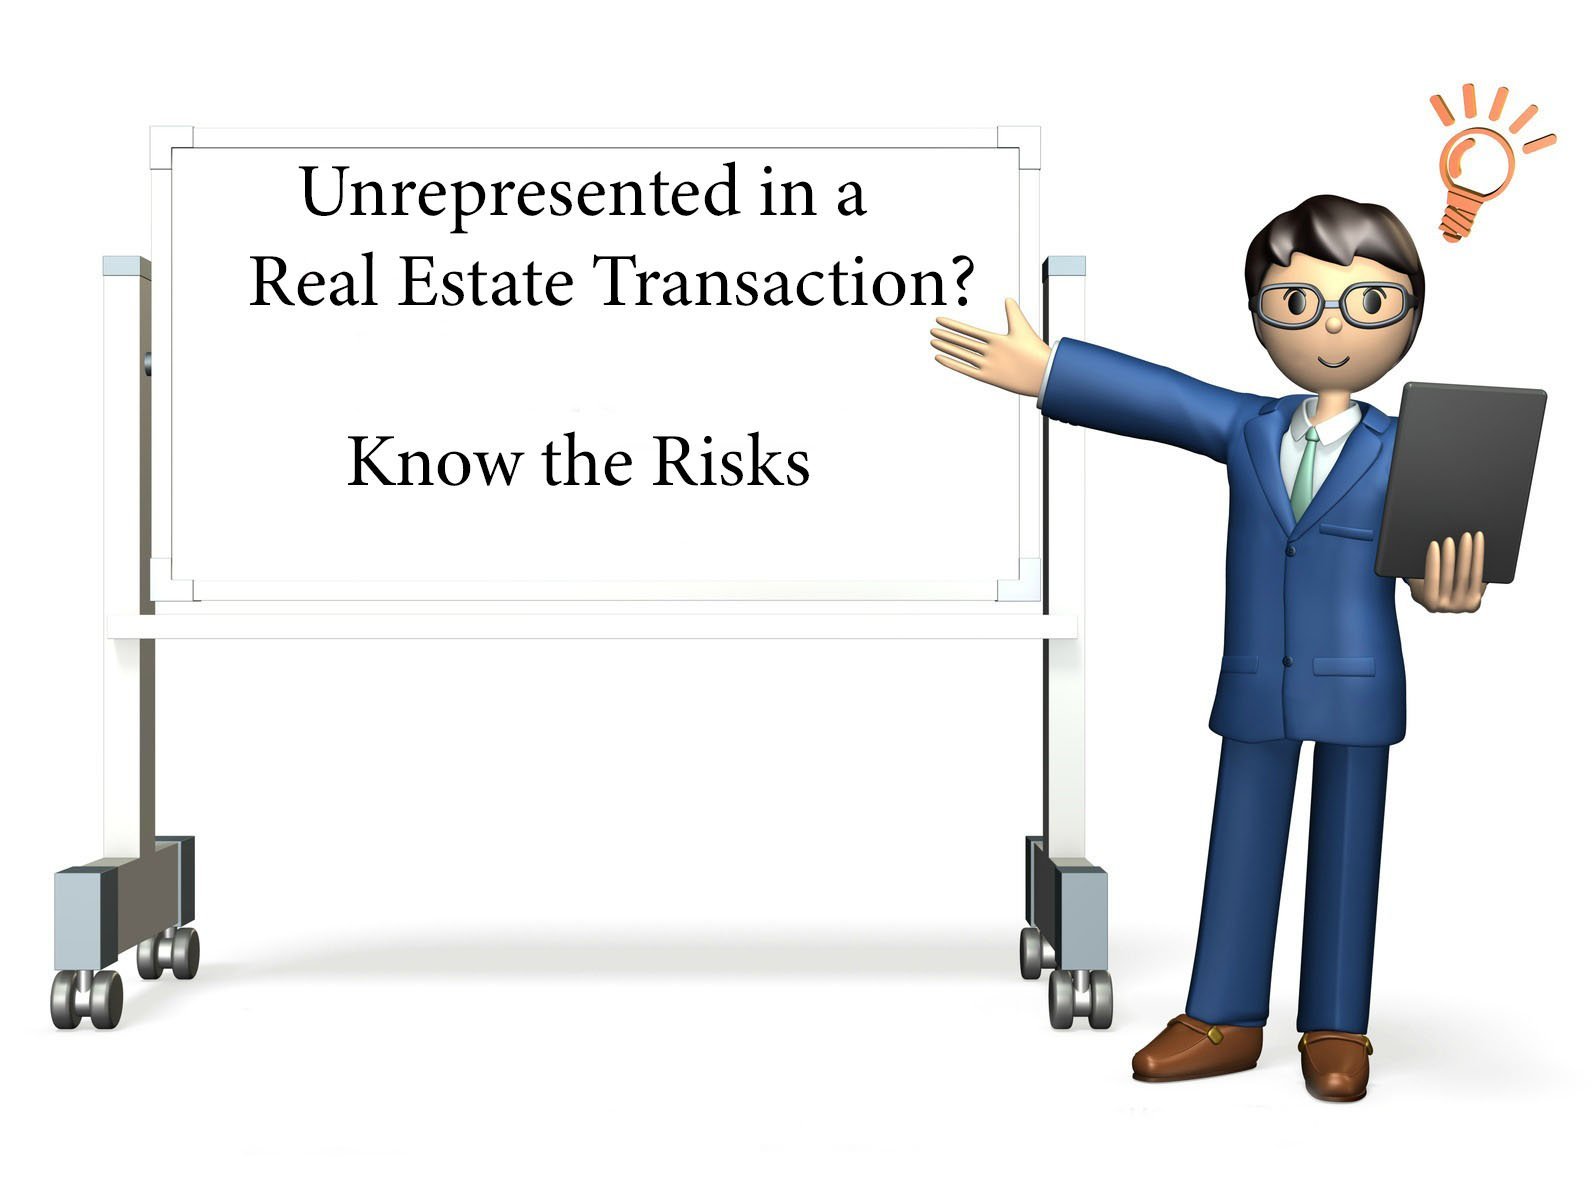 KNow the risks of being unrepresented